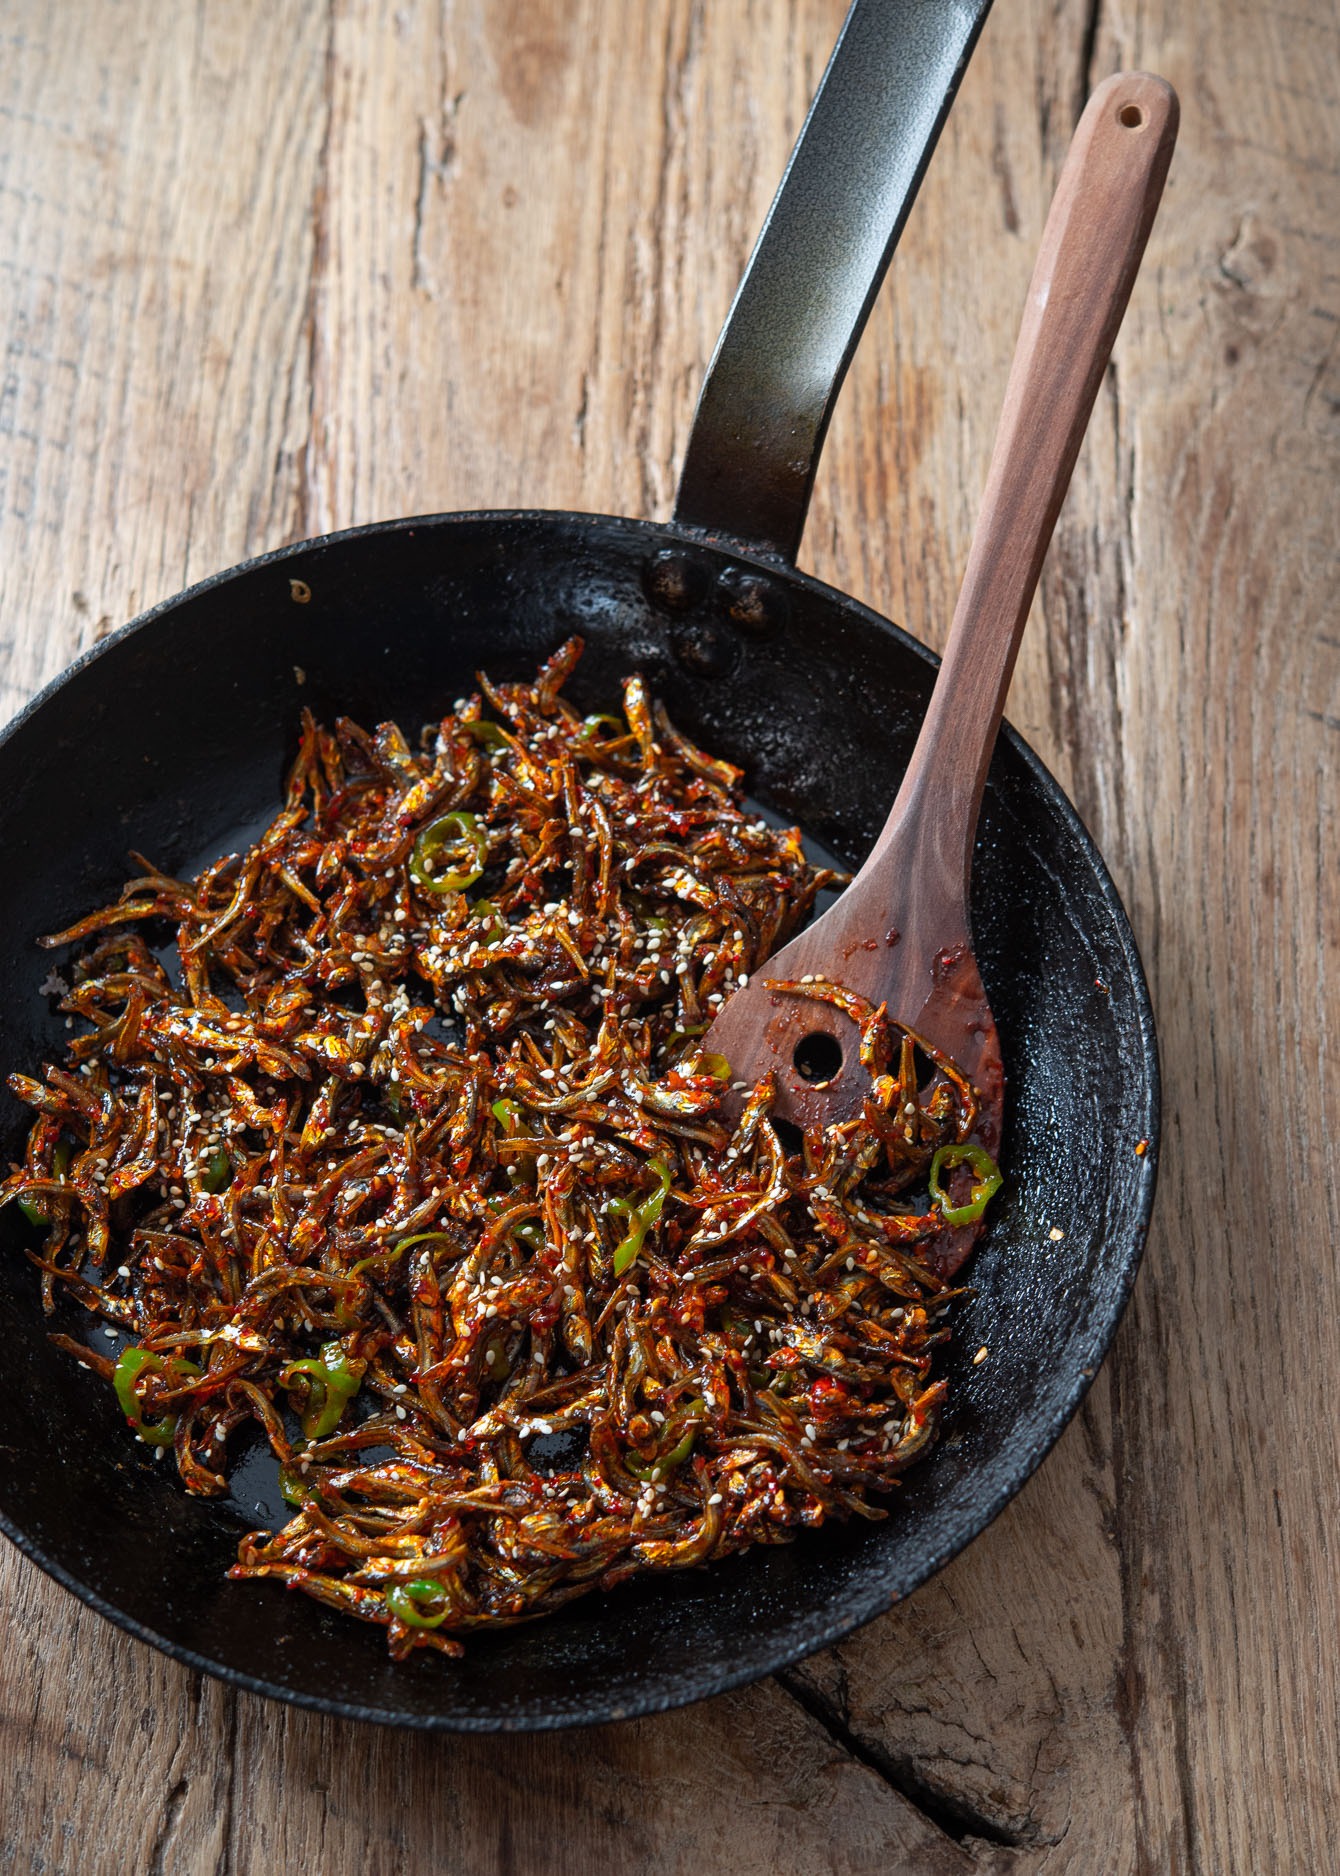 Gochujang anchovy side dish is made in a skillet